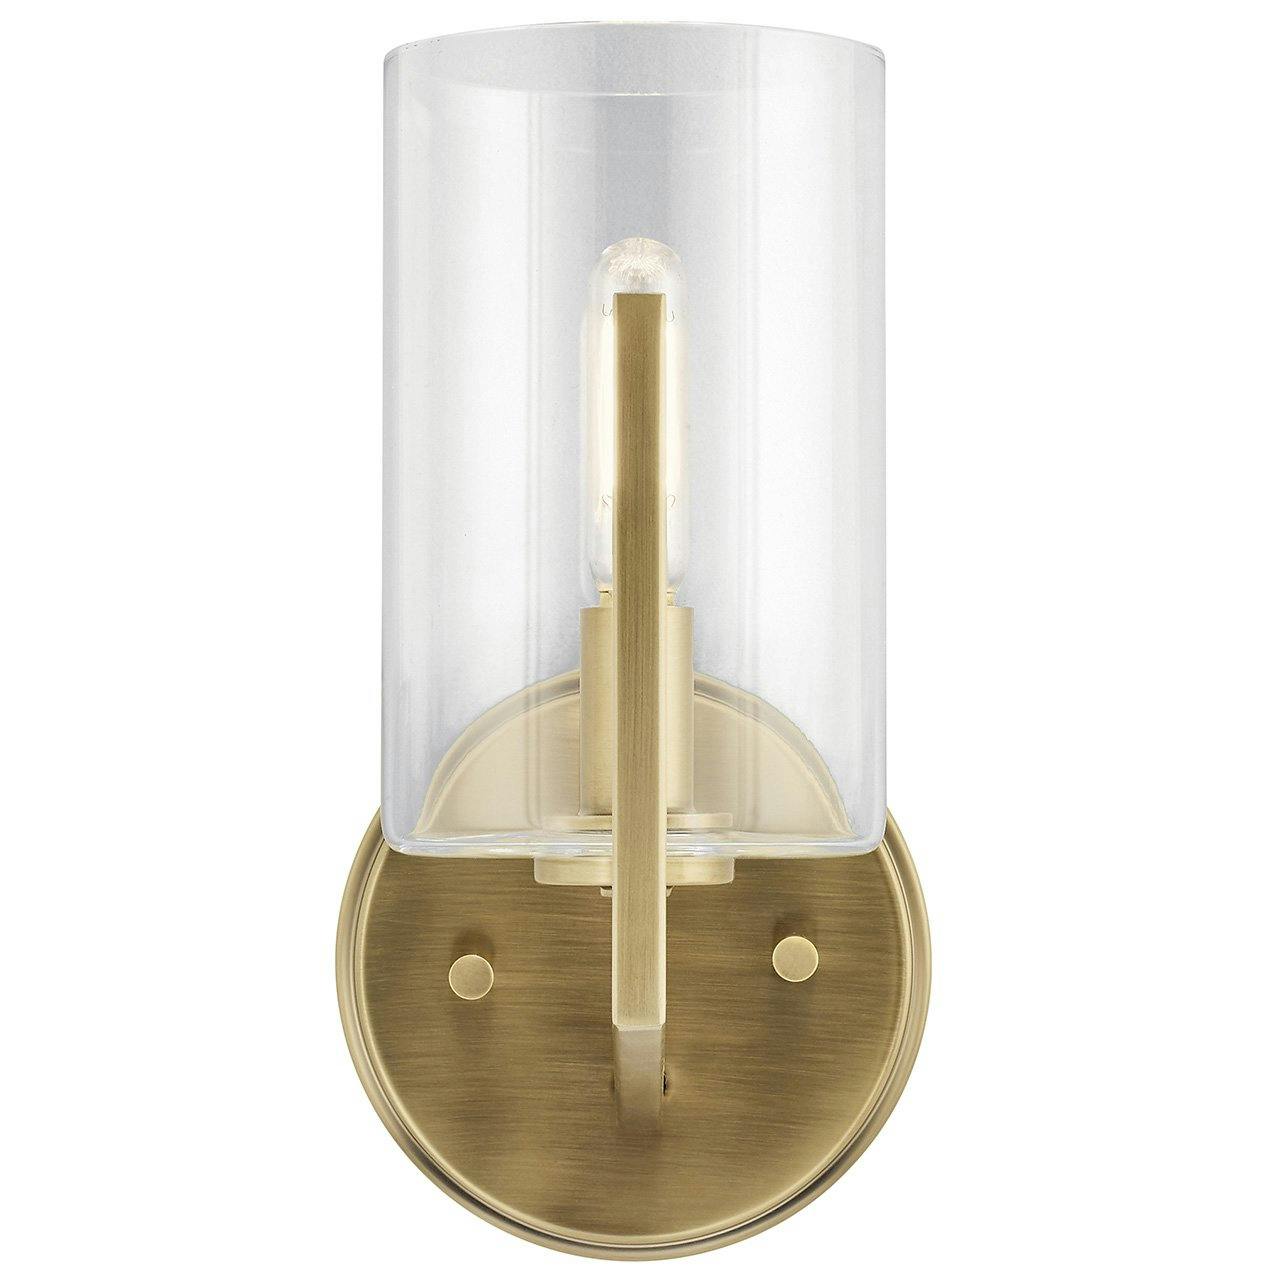 The Nye 9.75" 1 Light Sconce in Brass facing up on a white background